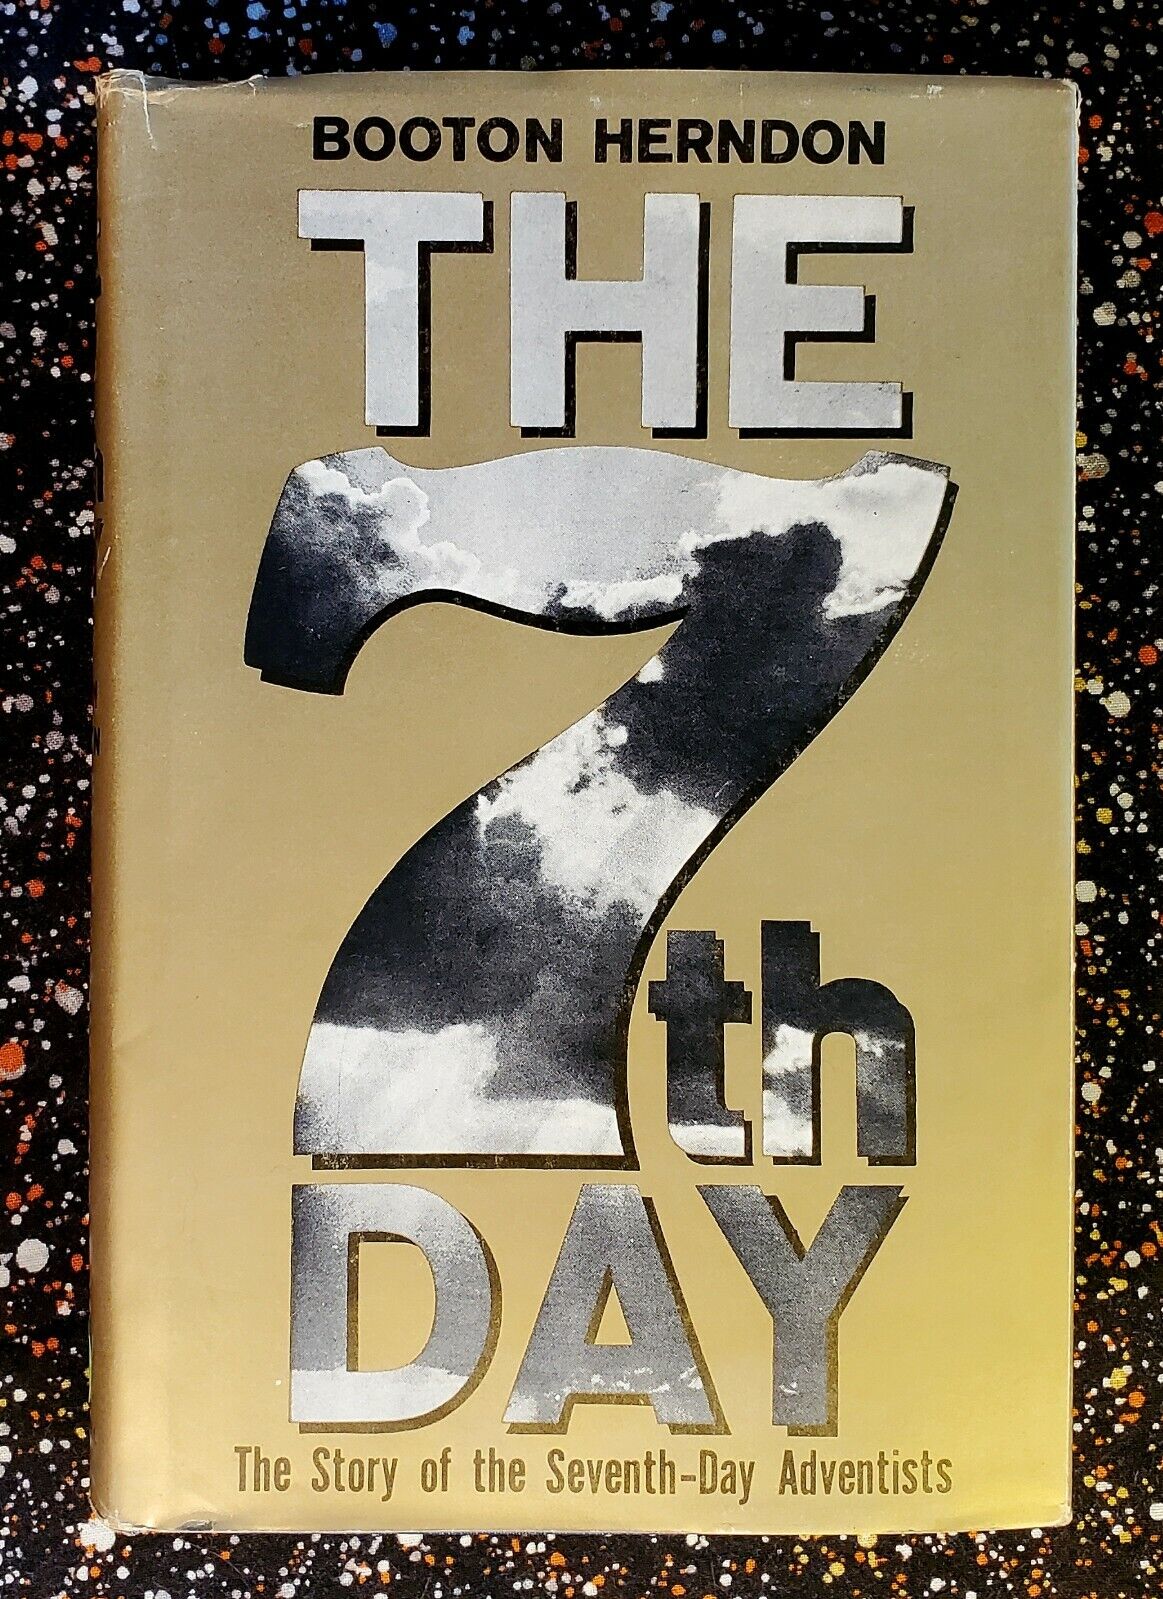 THE 7th DAY, THE STORY OF THE SEVENTH-DAY ADVENTISTS Booton Herndon, 1960, HC/DJ